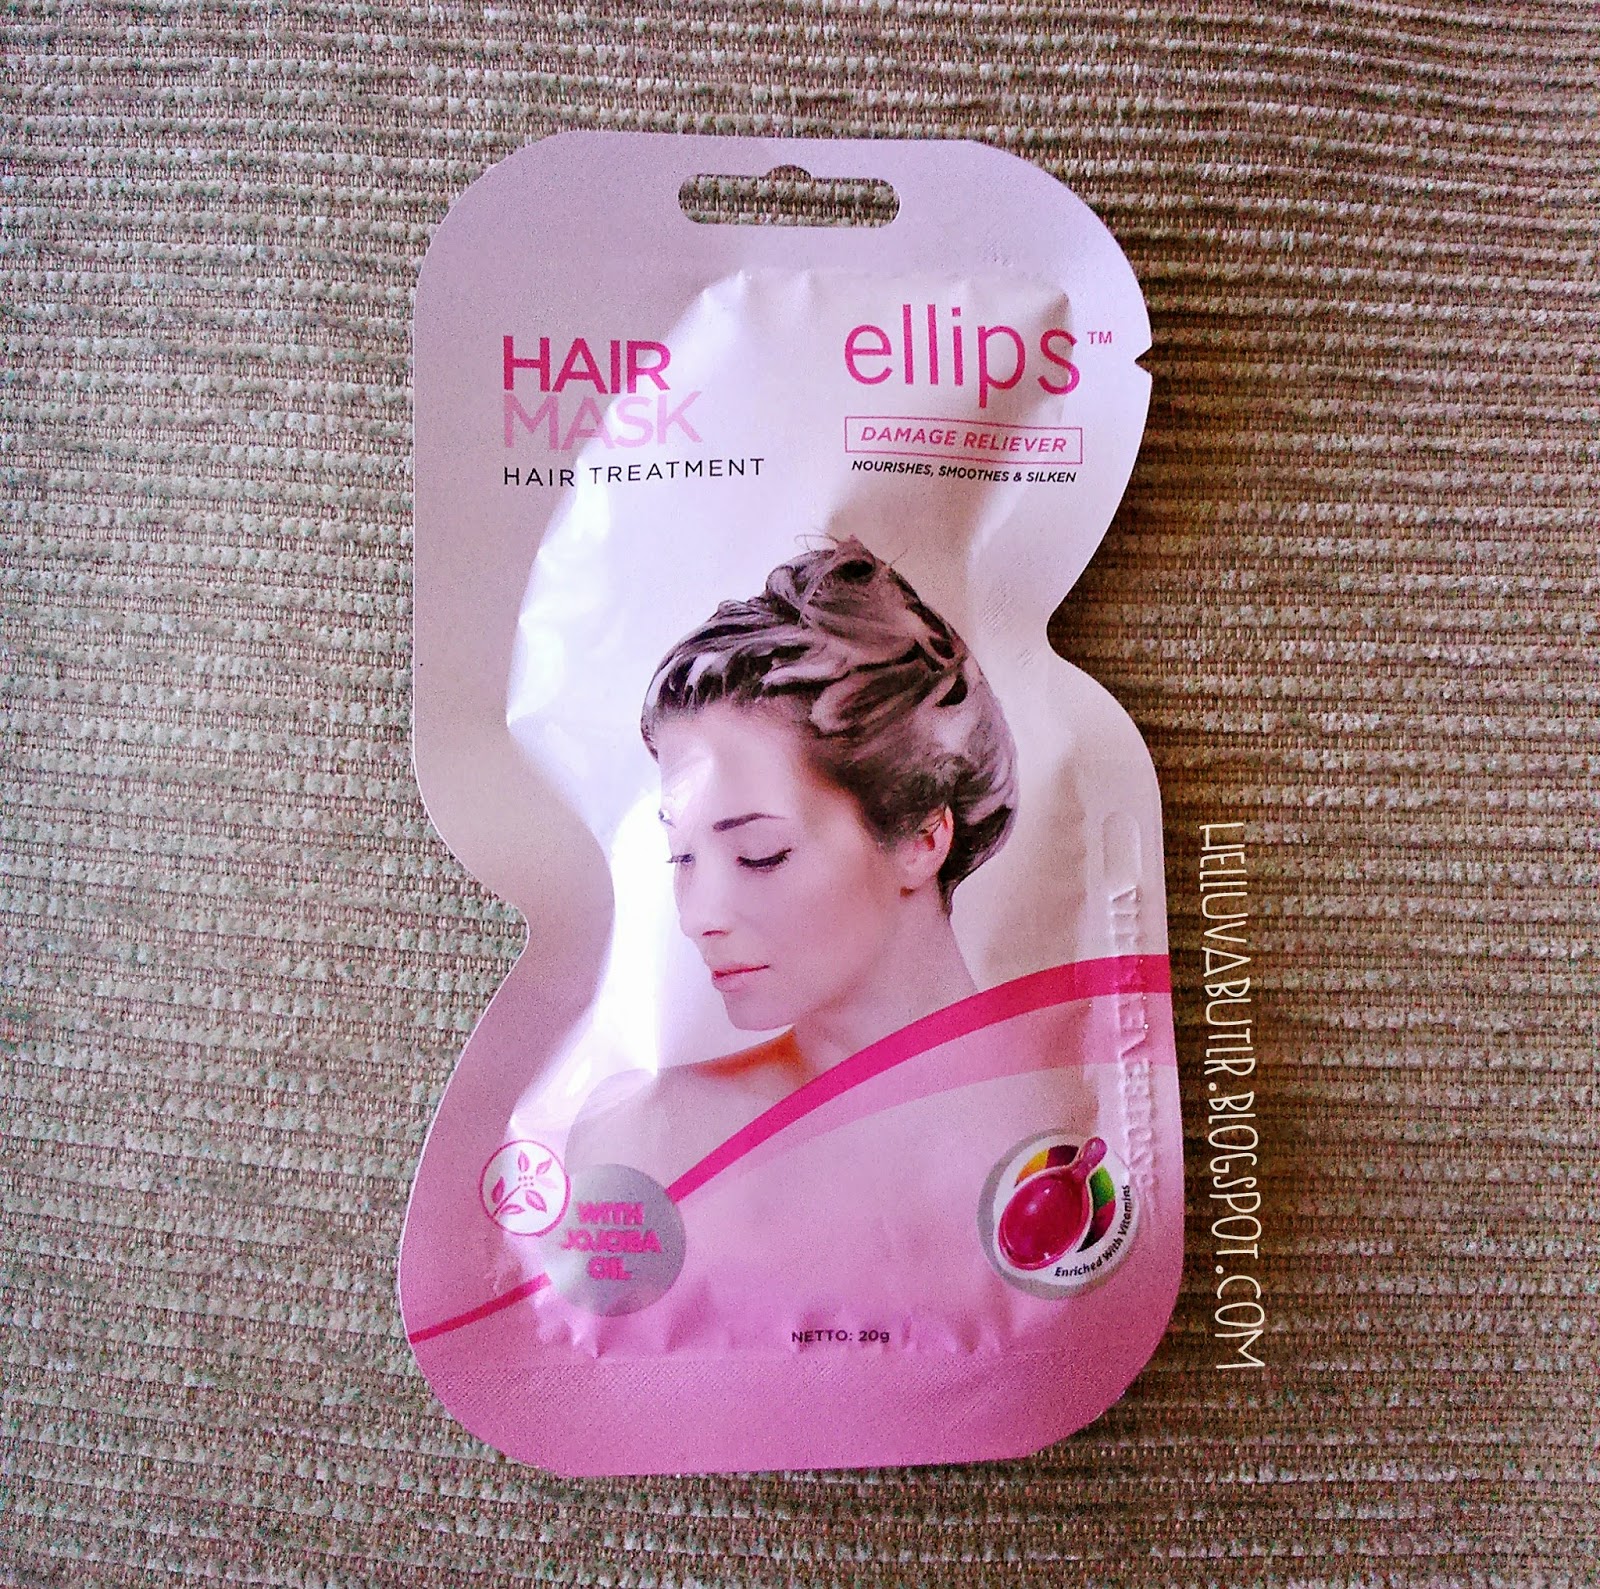 Ellips Hair Mask Damage Reliever Review Fuji Astyanis Blog